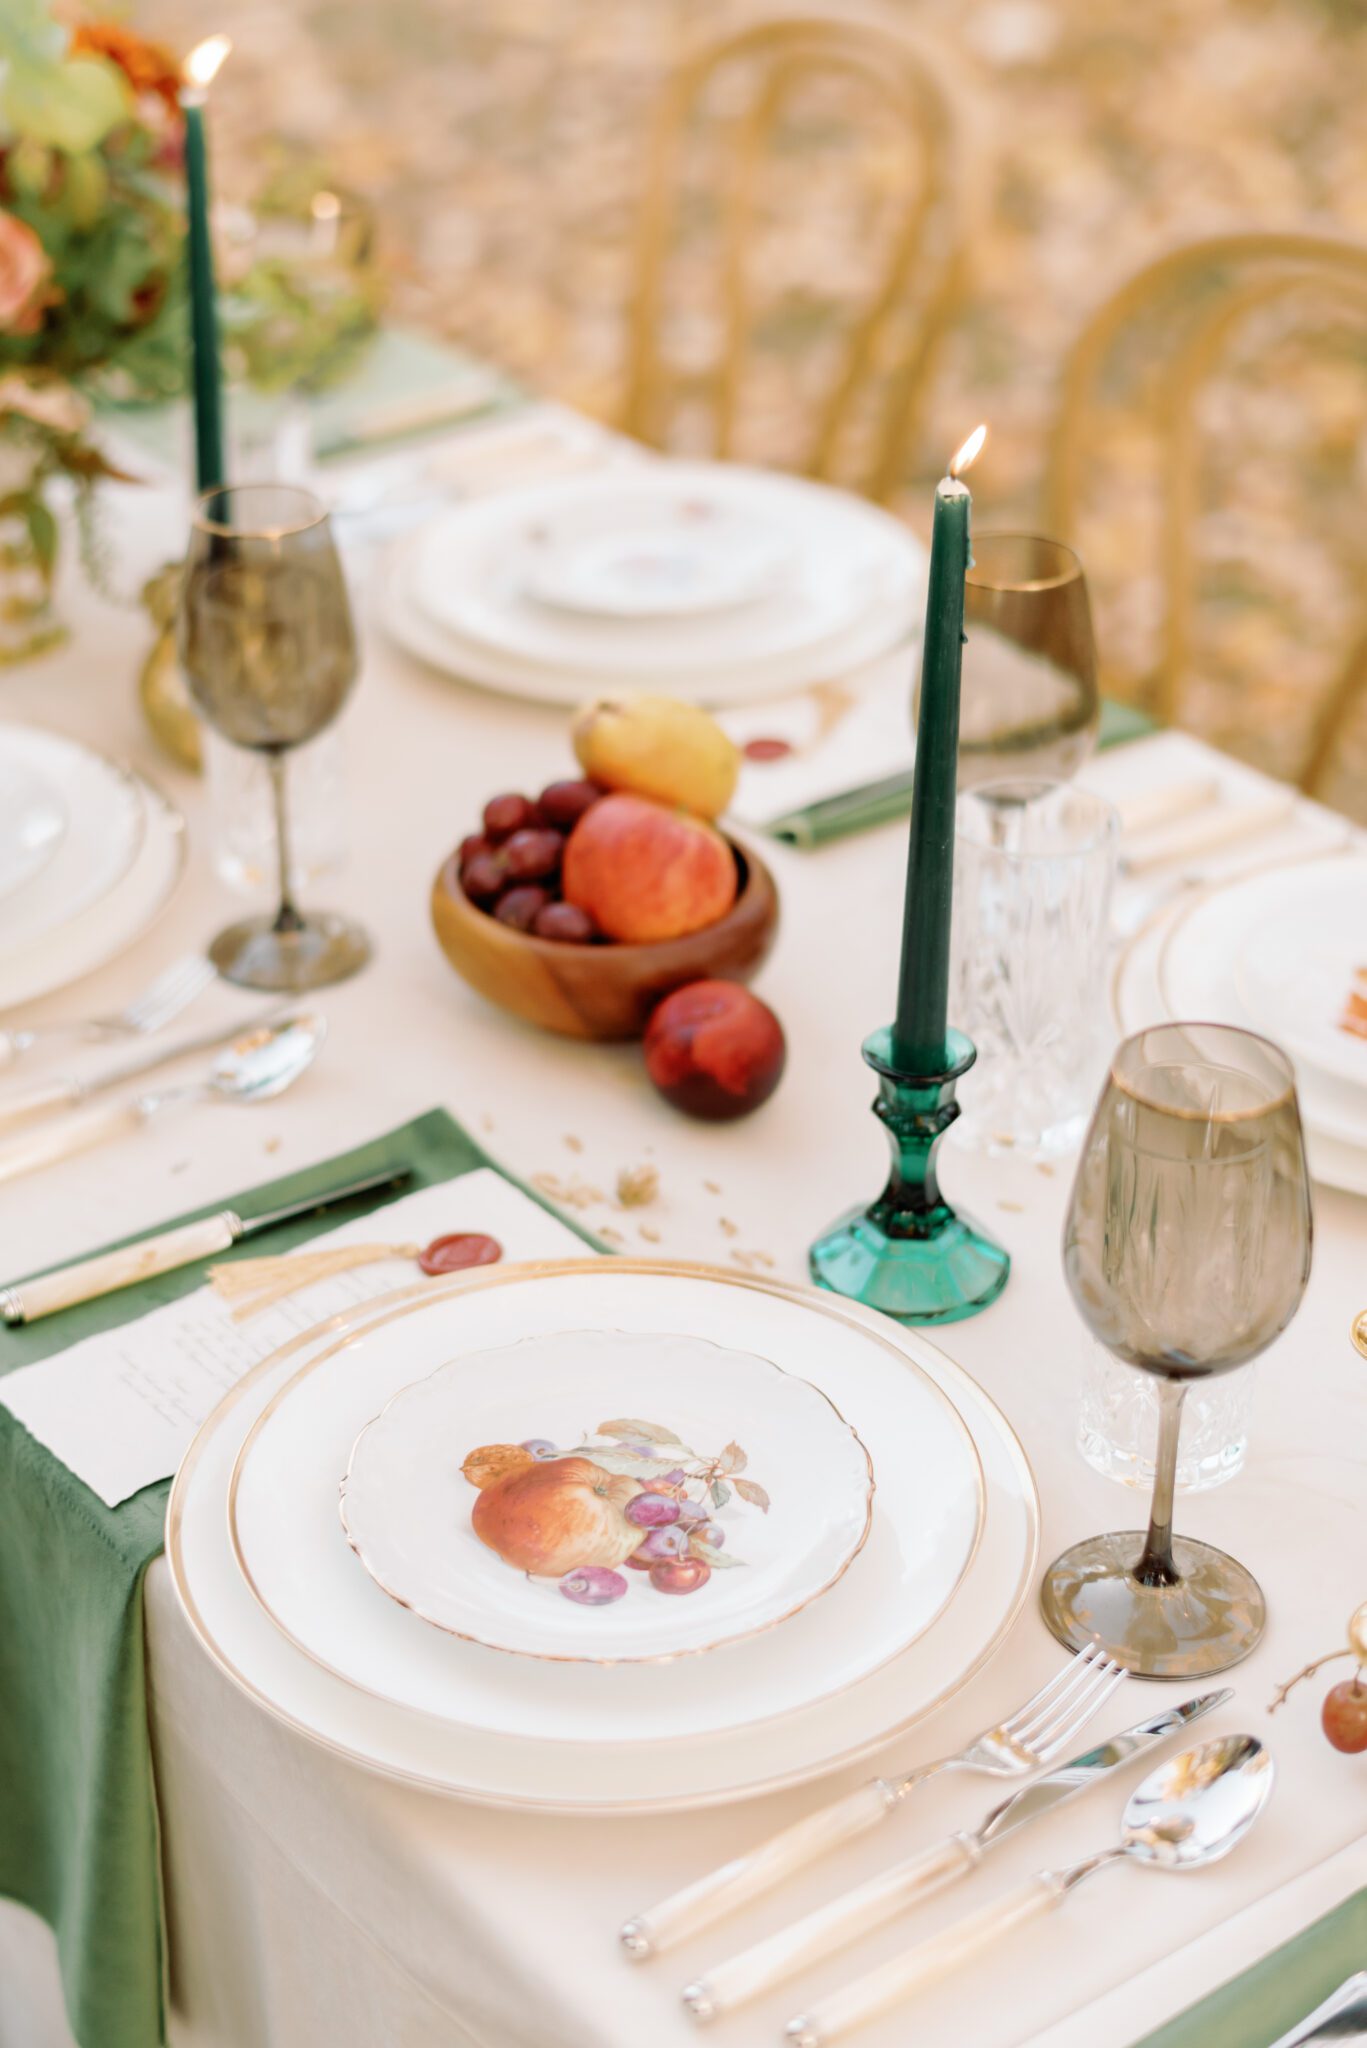 Al fresco dining at golden hour. Intimate autumn wedding reception tablescape featuring elegant menus with crimson wax seals and gold tassel accents, smoke tinted wine glasses with. agold rim, gold-rimmed vintage china with fruit paintings on them, pearl cutlery, and antique gold pear-shaped candleholders. Also includes olive green velvet napkins, wooden fruit bowl displays, and organic fall floral centerpieces. 